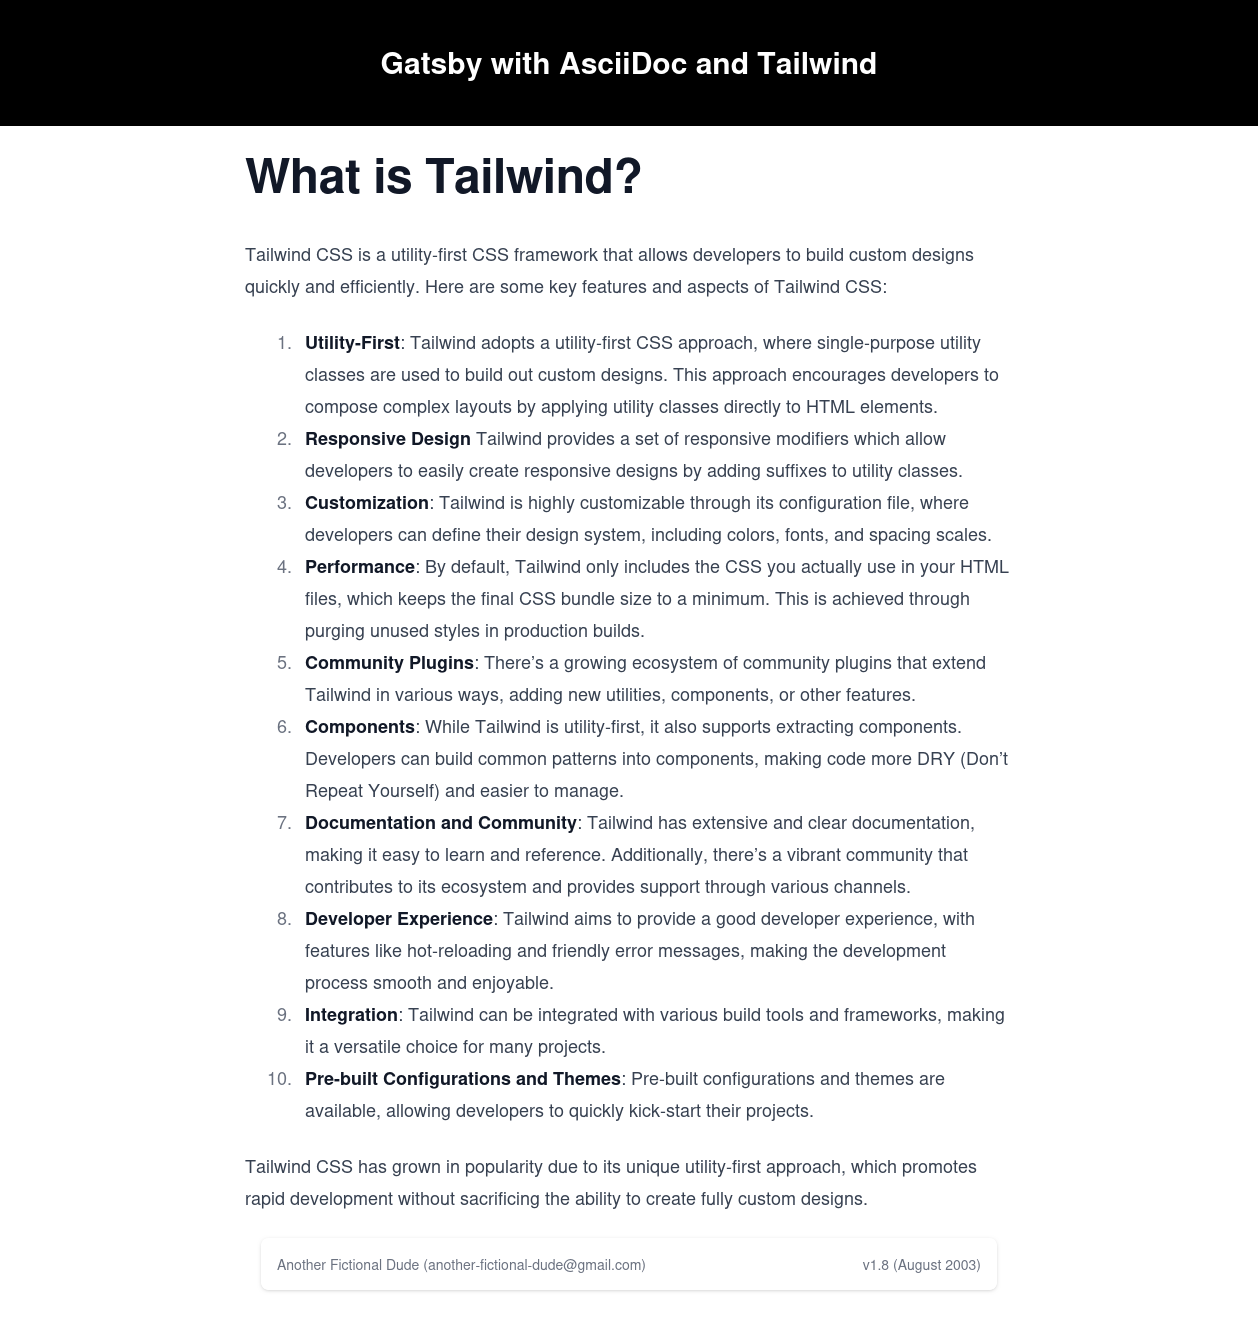 Gatsby test site 'What is Tailwind?' page.